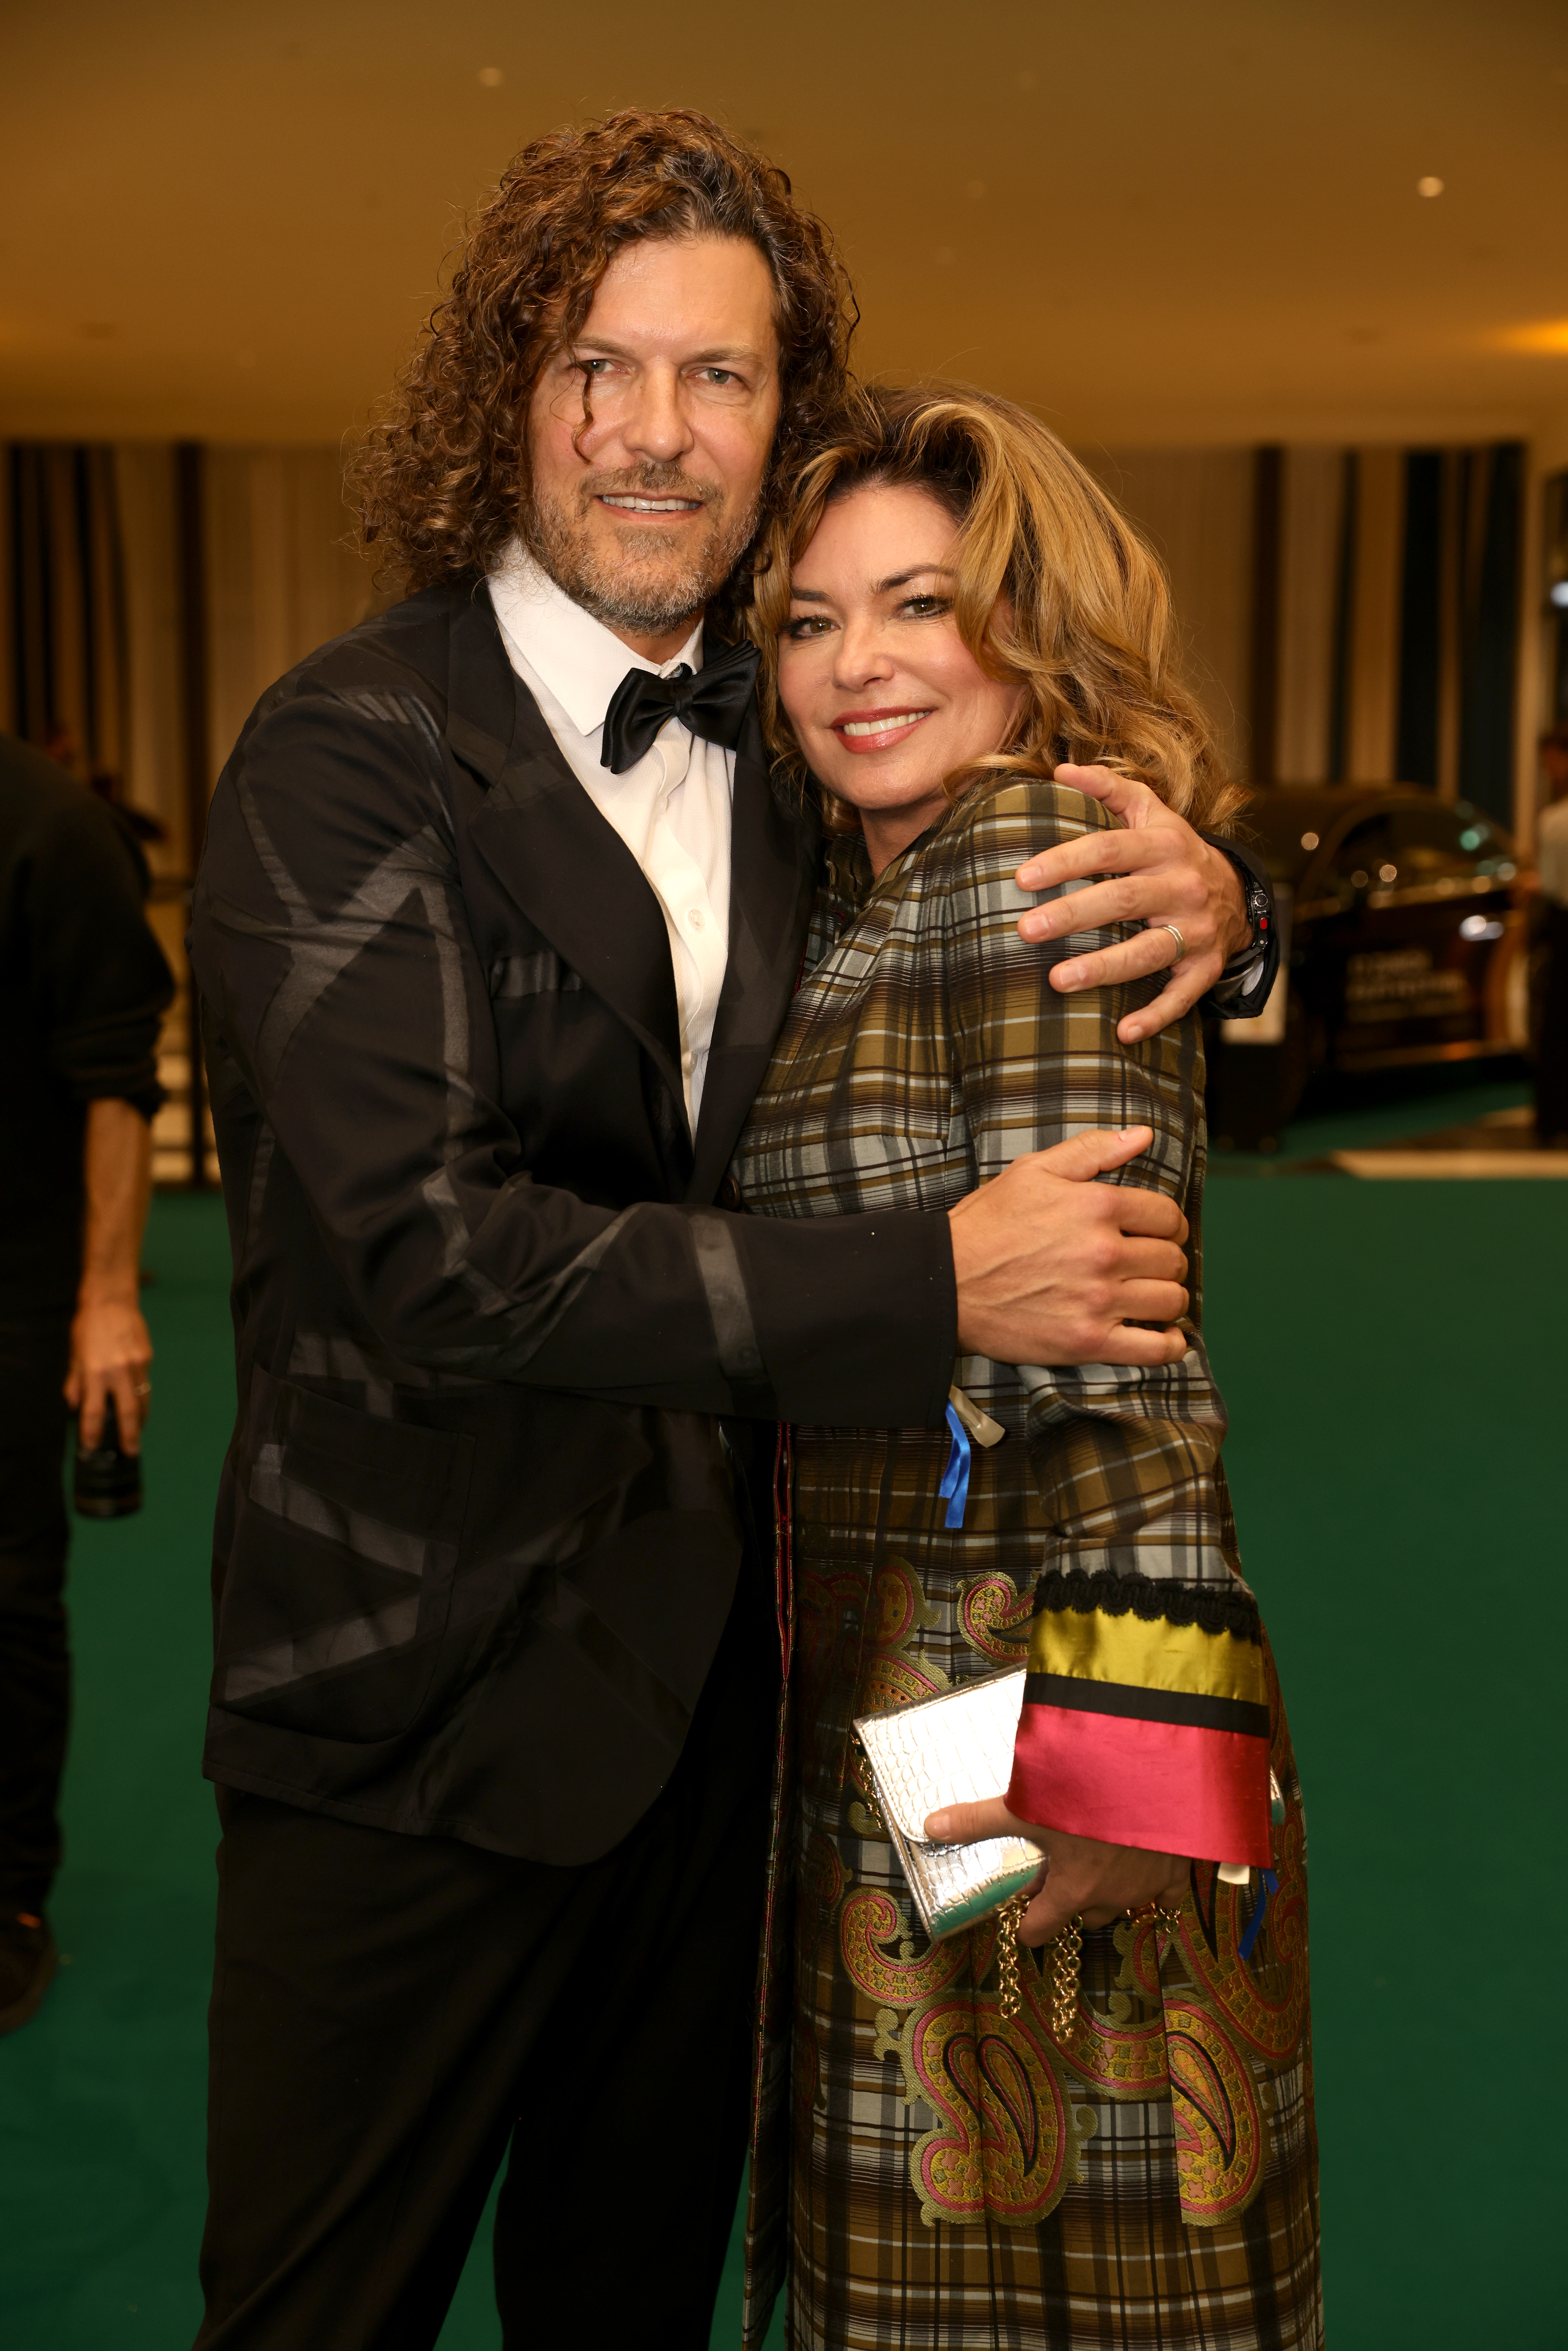 Frédéric Thiébaud and Shania Twain attend the Opening Night and premiere of "Und morgen seid ihr tot" during the 17th Zurich Film Festival at Kongresshaus on September 23, 2021, in Zurich, Switzerland. | Source: Getty Images